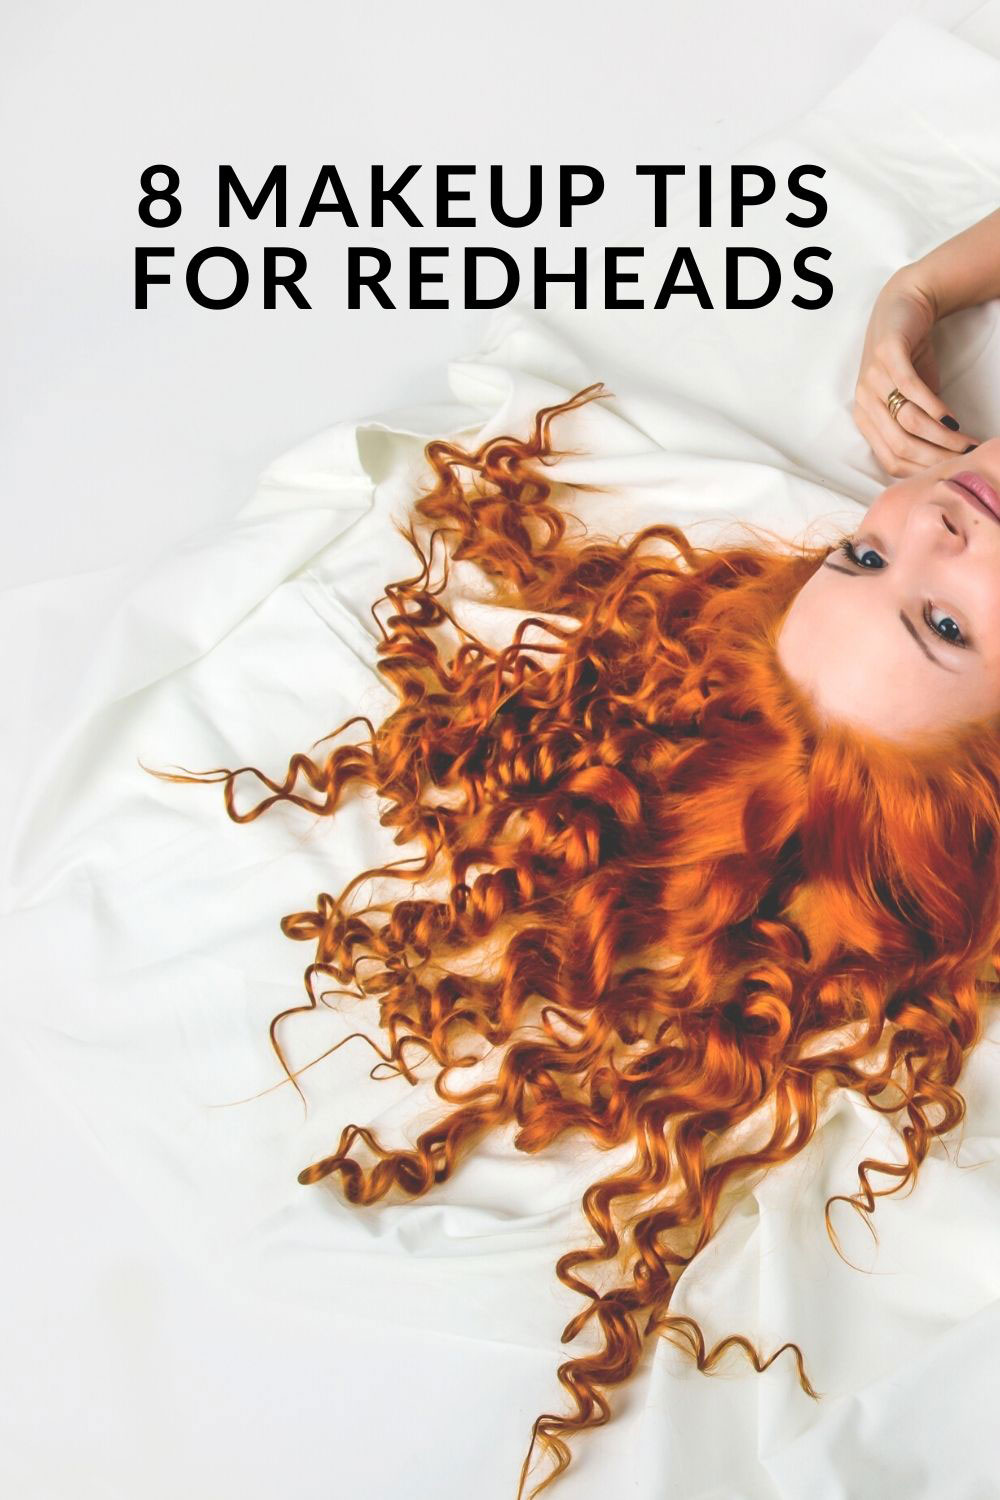 8 makeup tips for redheads